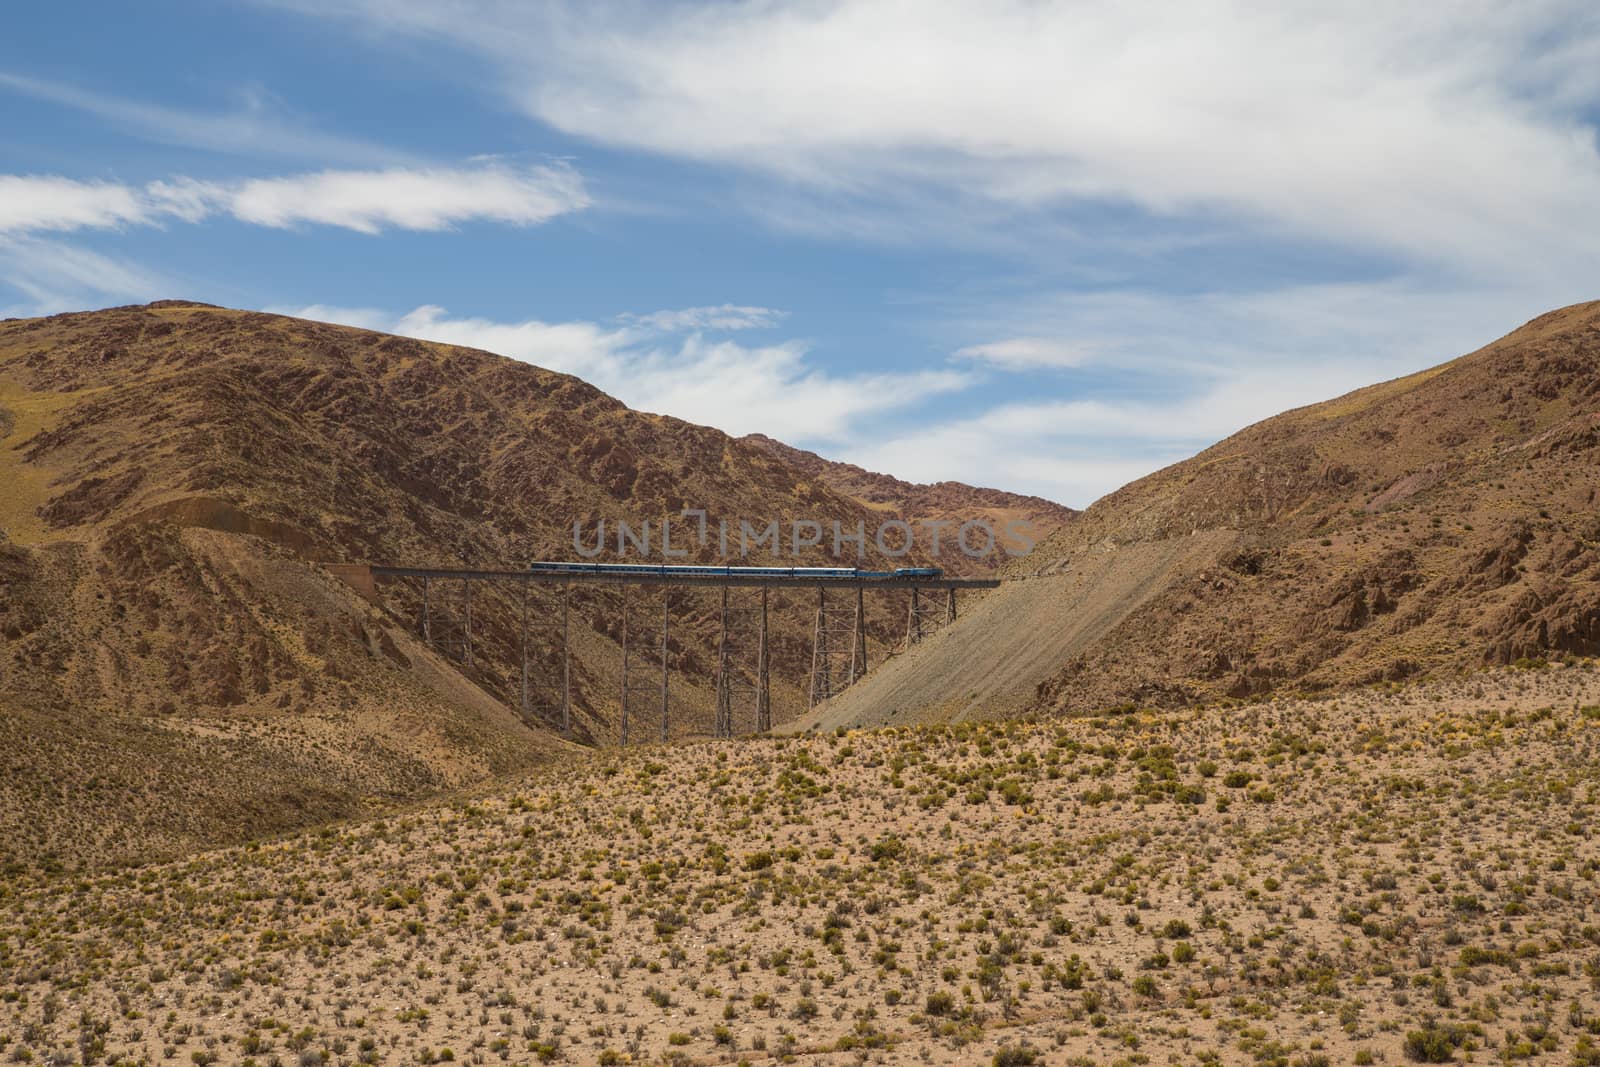 Photograph of a train driving over the Polvorilla viaduct in the Northwest of Argentina.